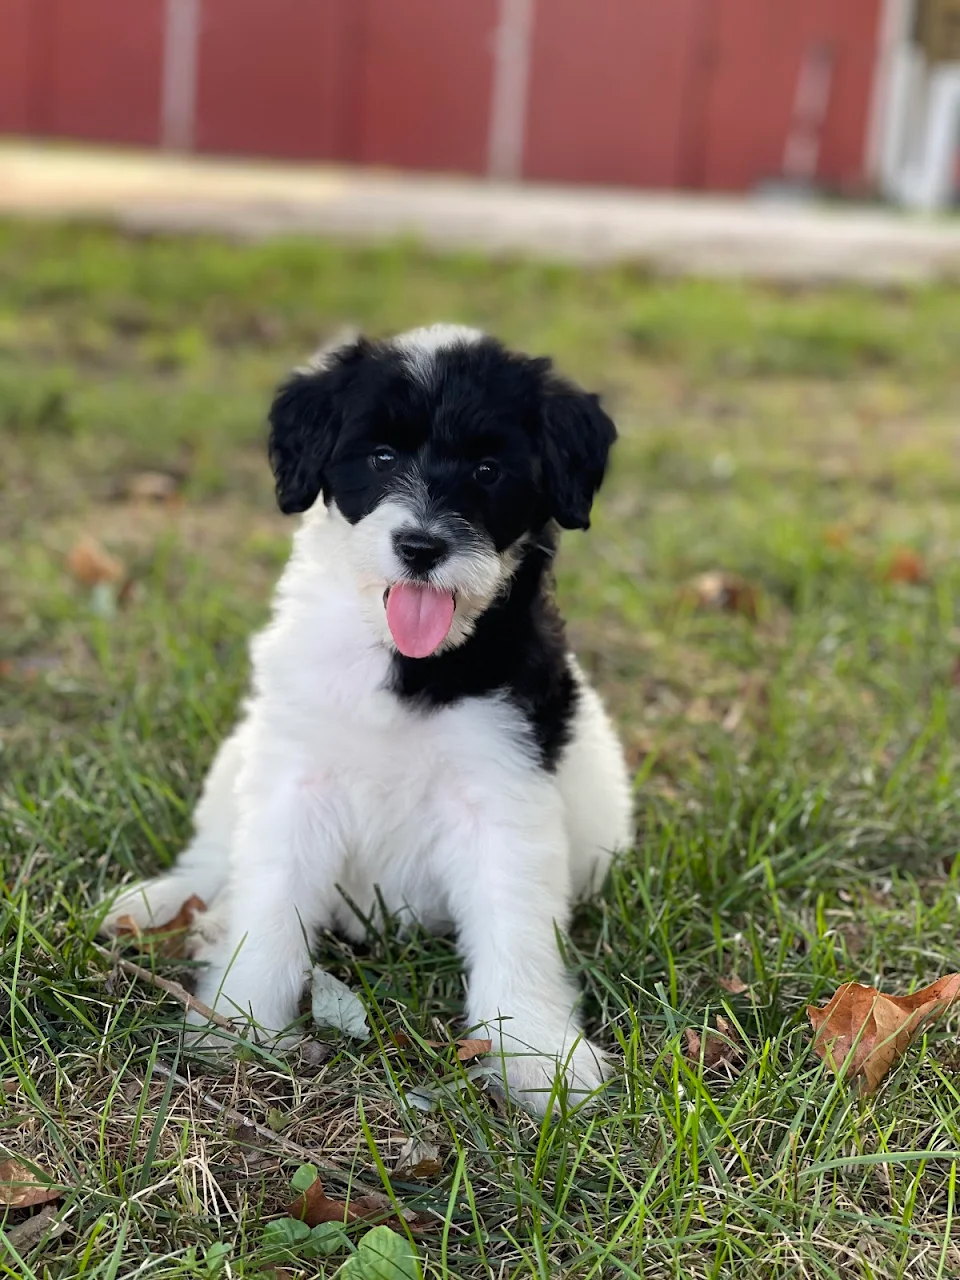 She needs a name! Portuguese Water Dog nameless for 2 weeks now and she’s getting upset…